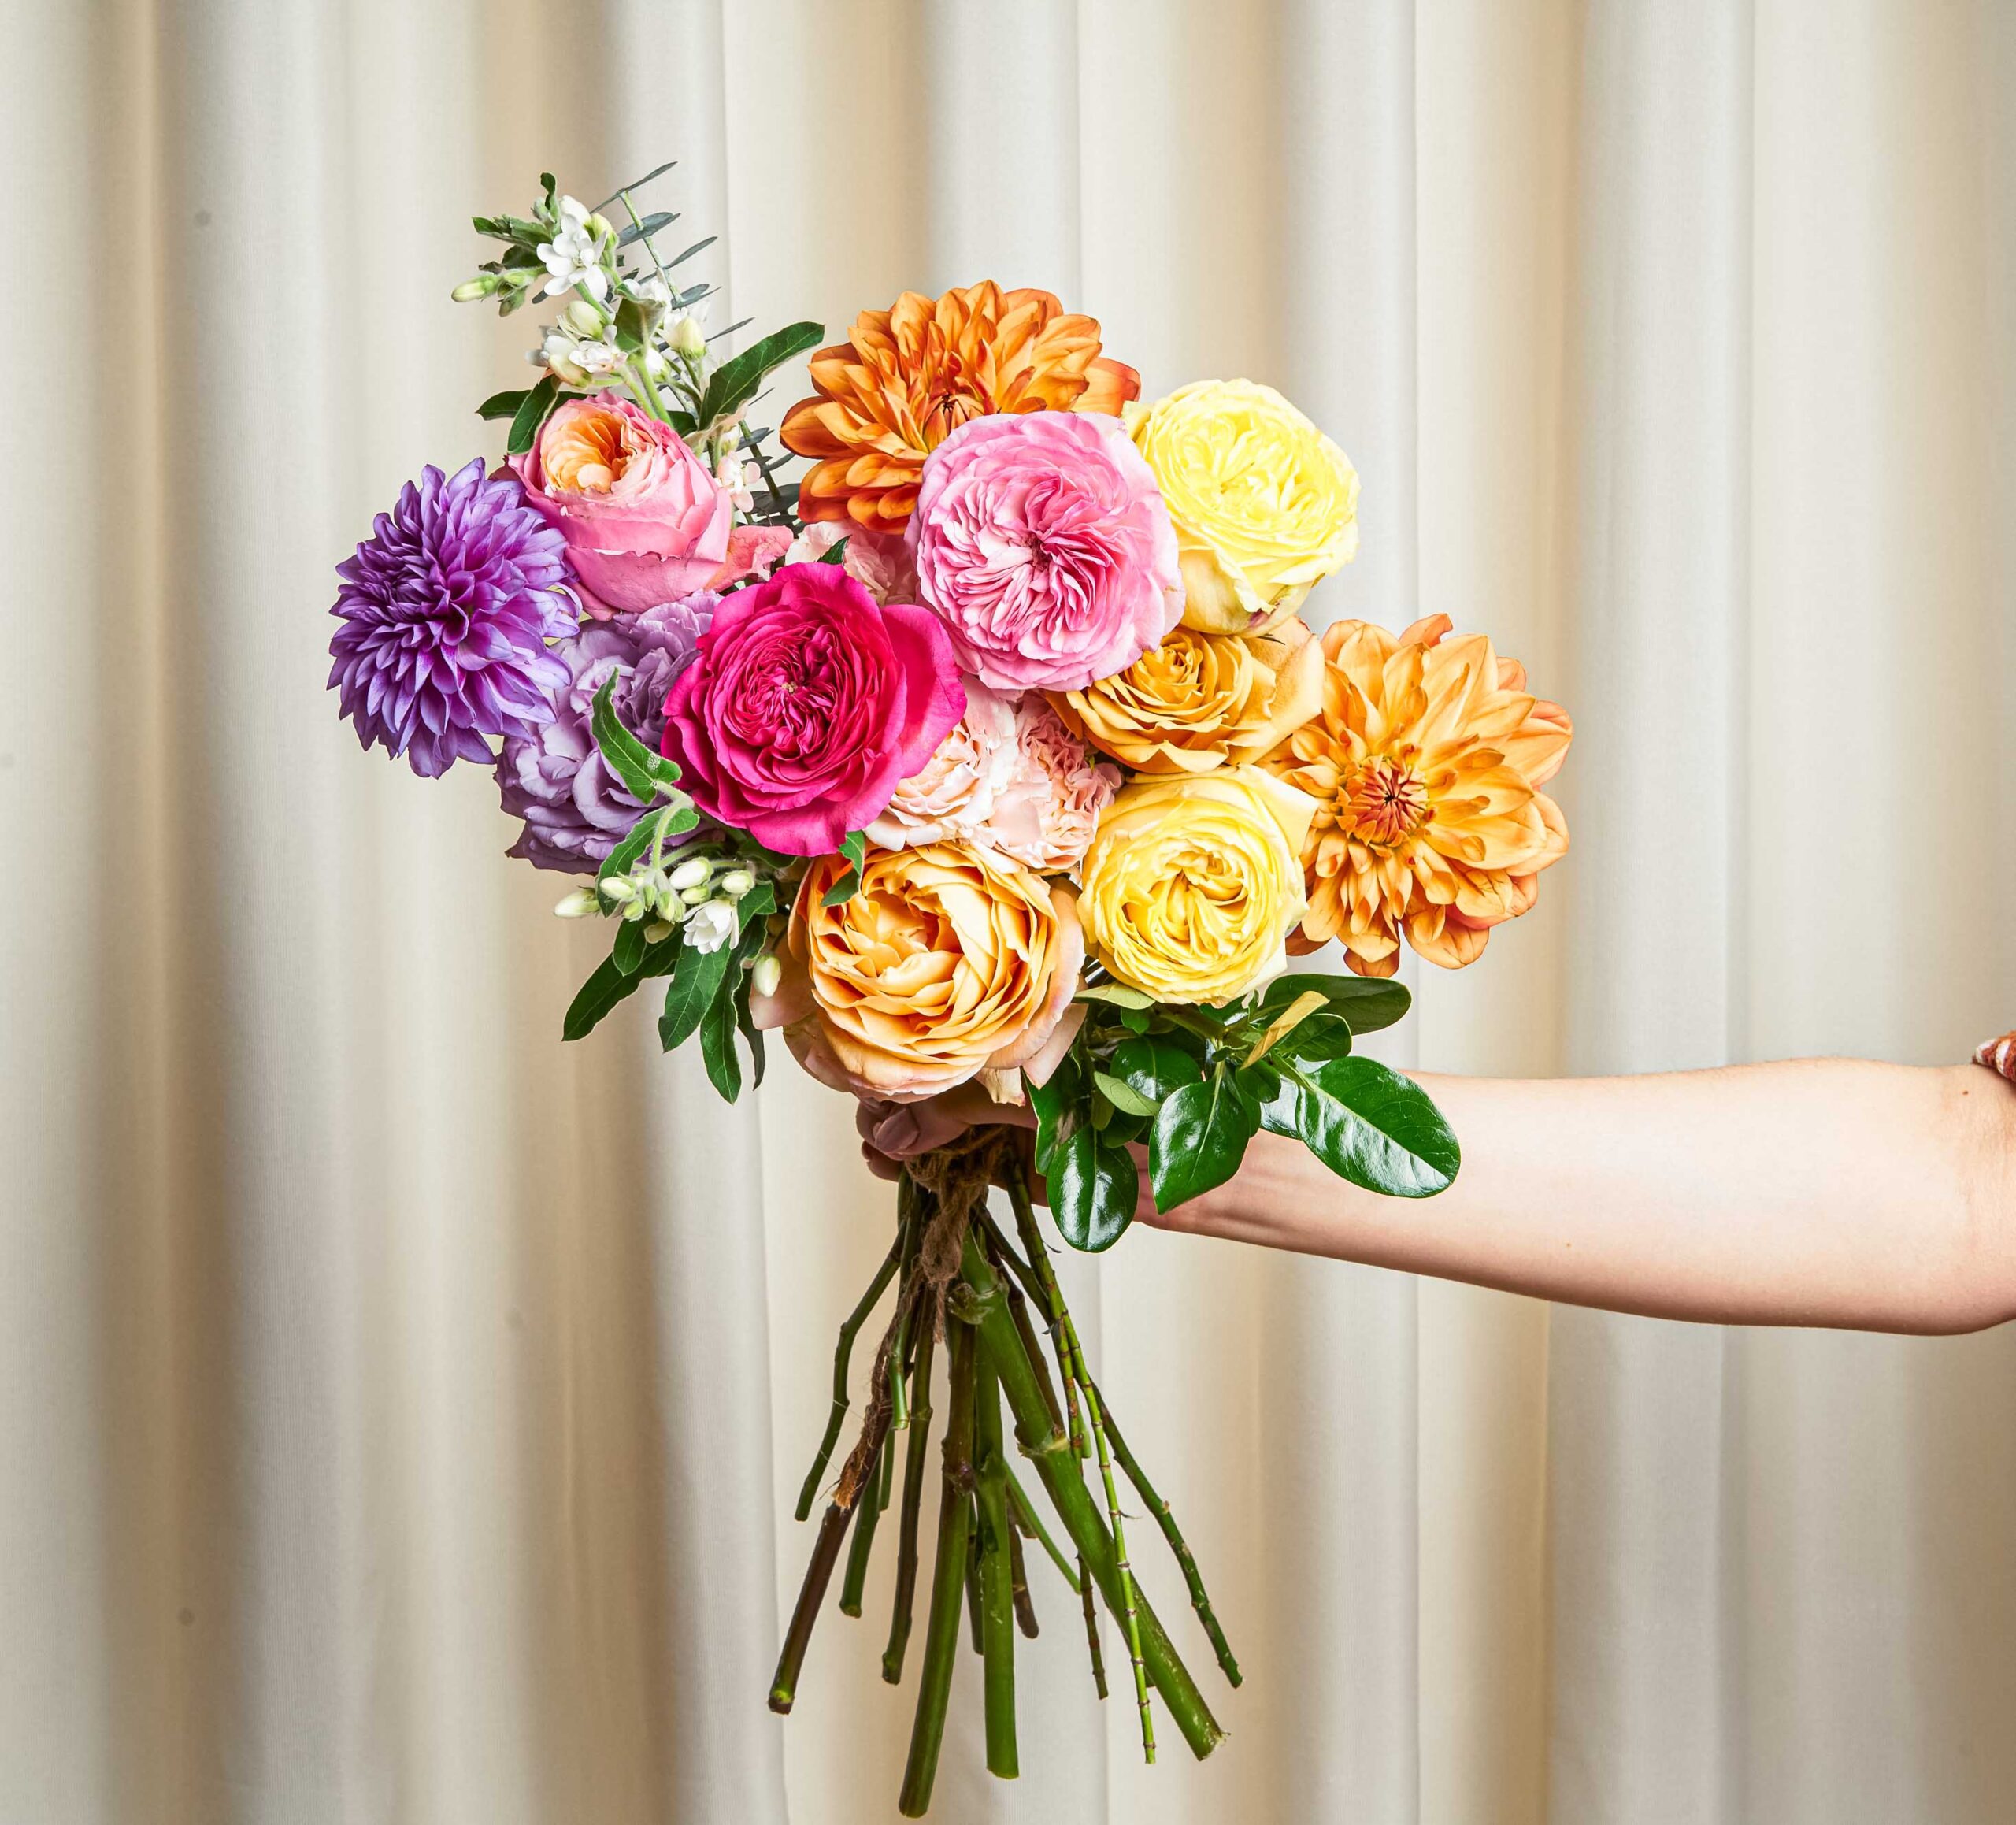 A colorful bouquet of roses and dahlias